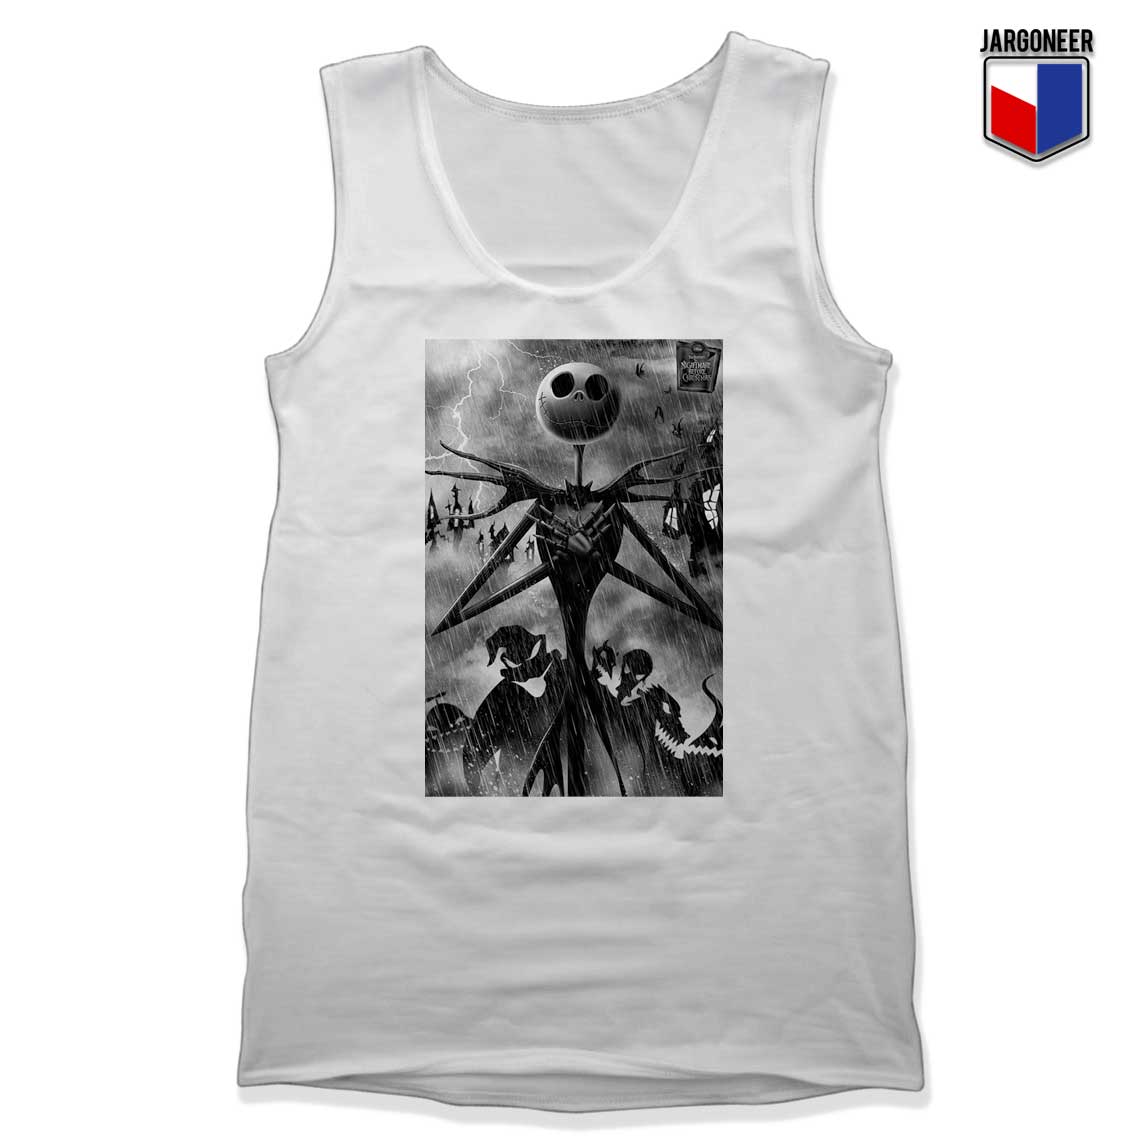 The Nightmare Before Christmas White Tank Top - Shop Unique Graphic Cool Shirt Designs